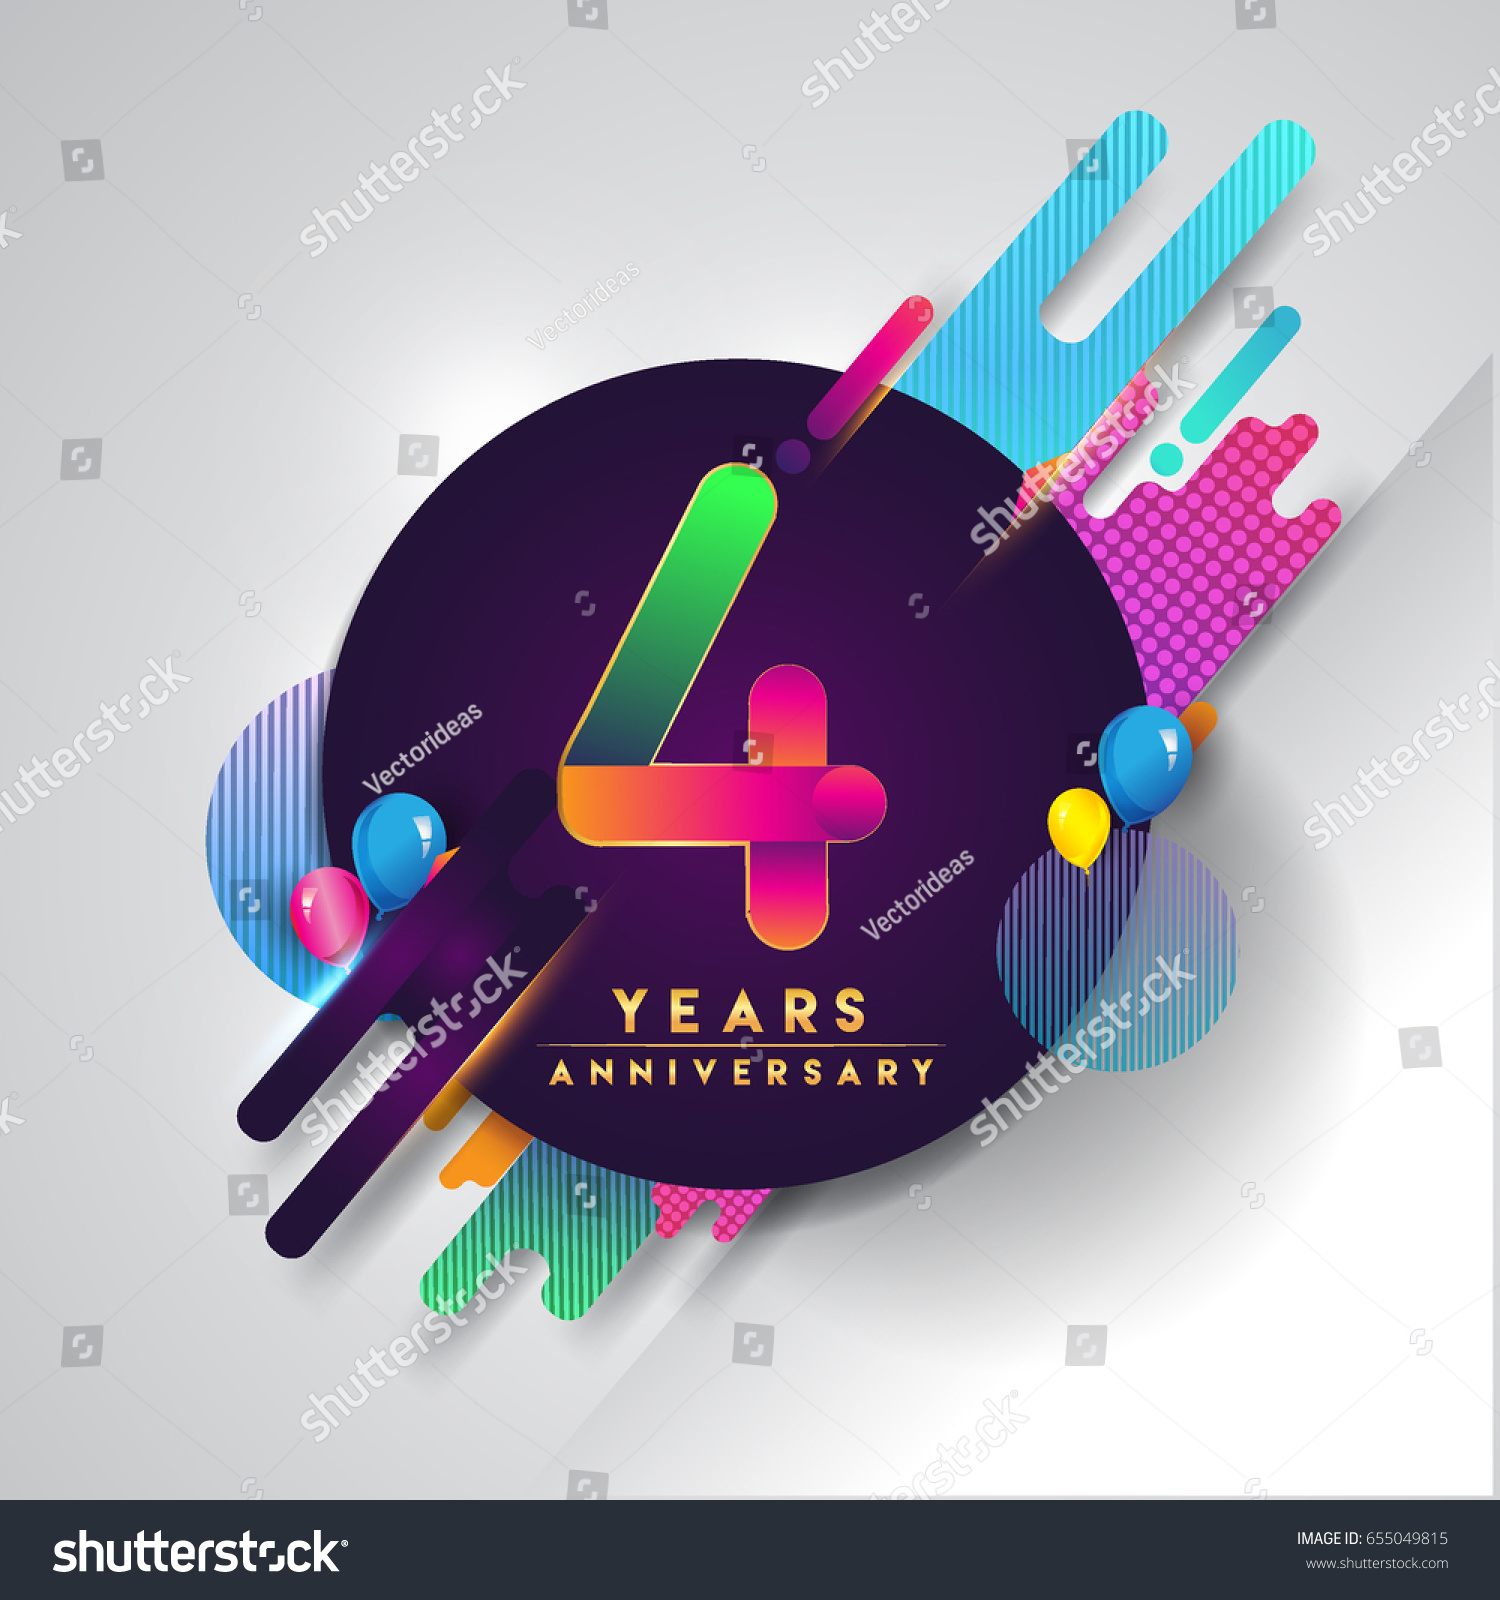 SVG of 4th years Anniversary logo with colorful abstract background, vector design template elements for invitation card and poster four years birthday celebration svg